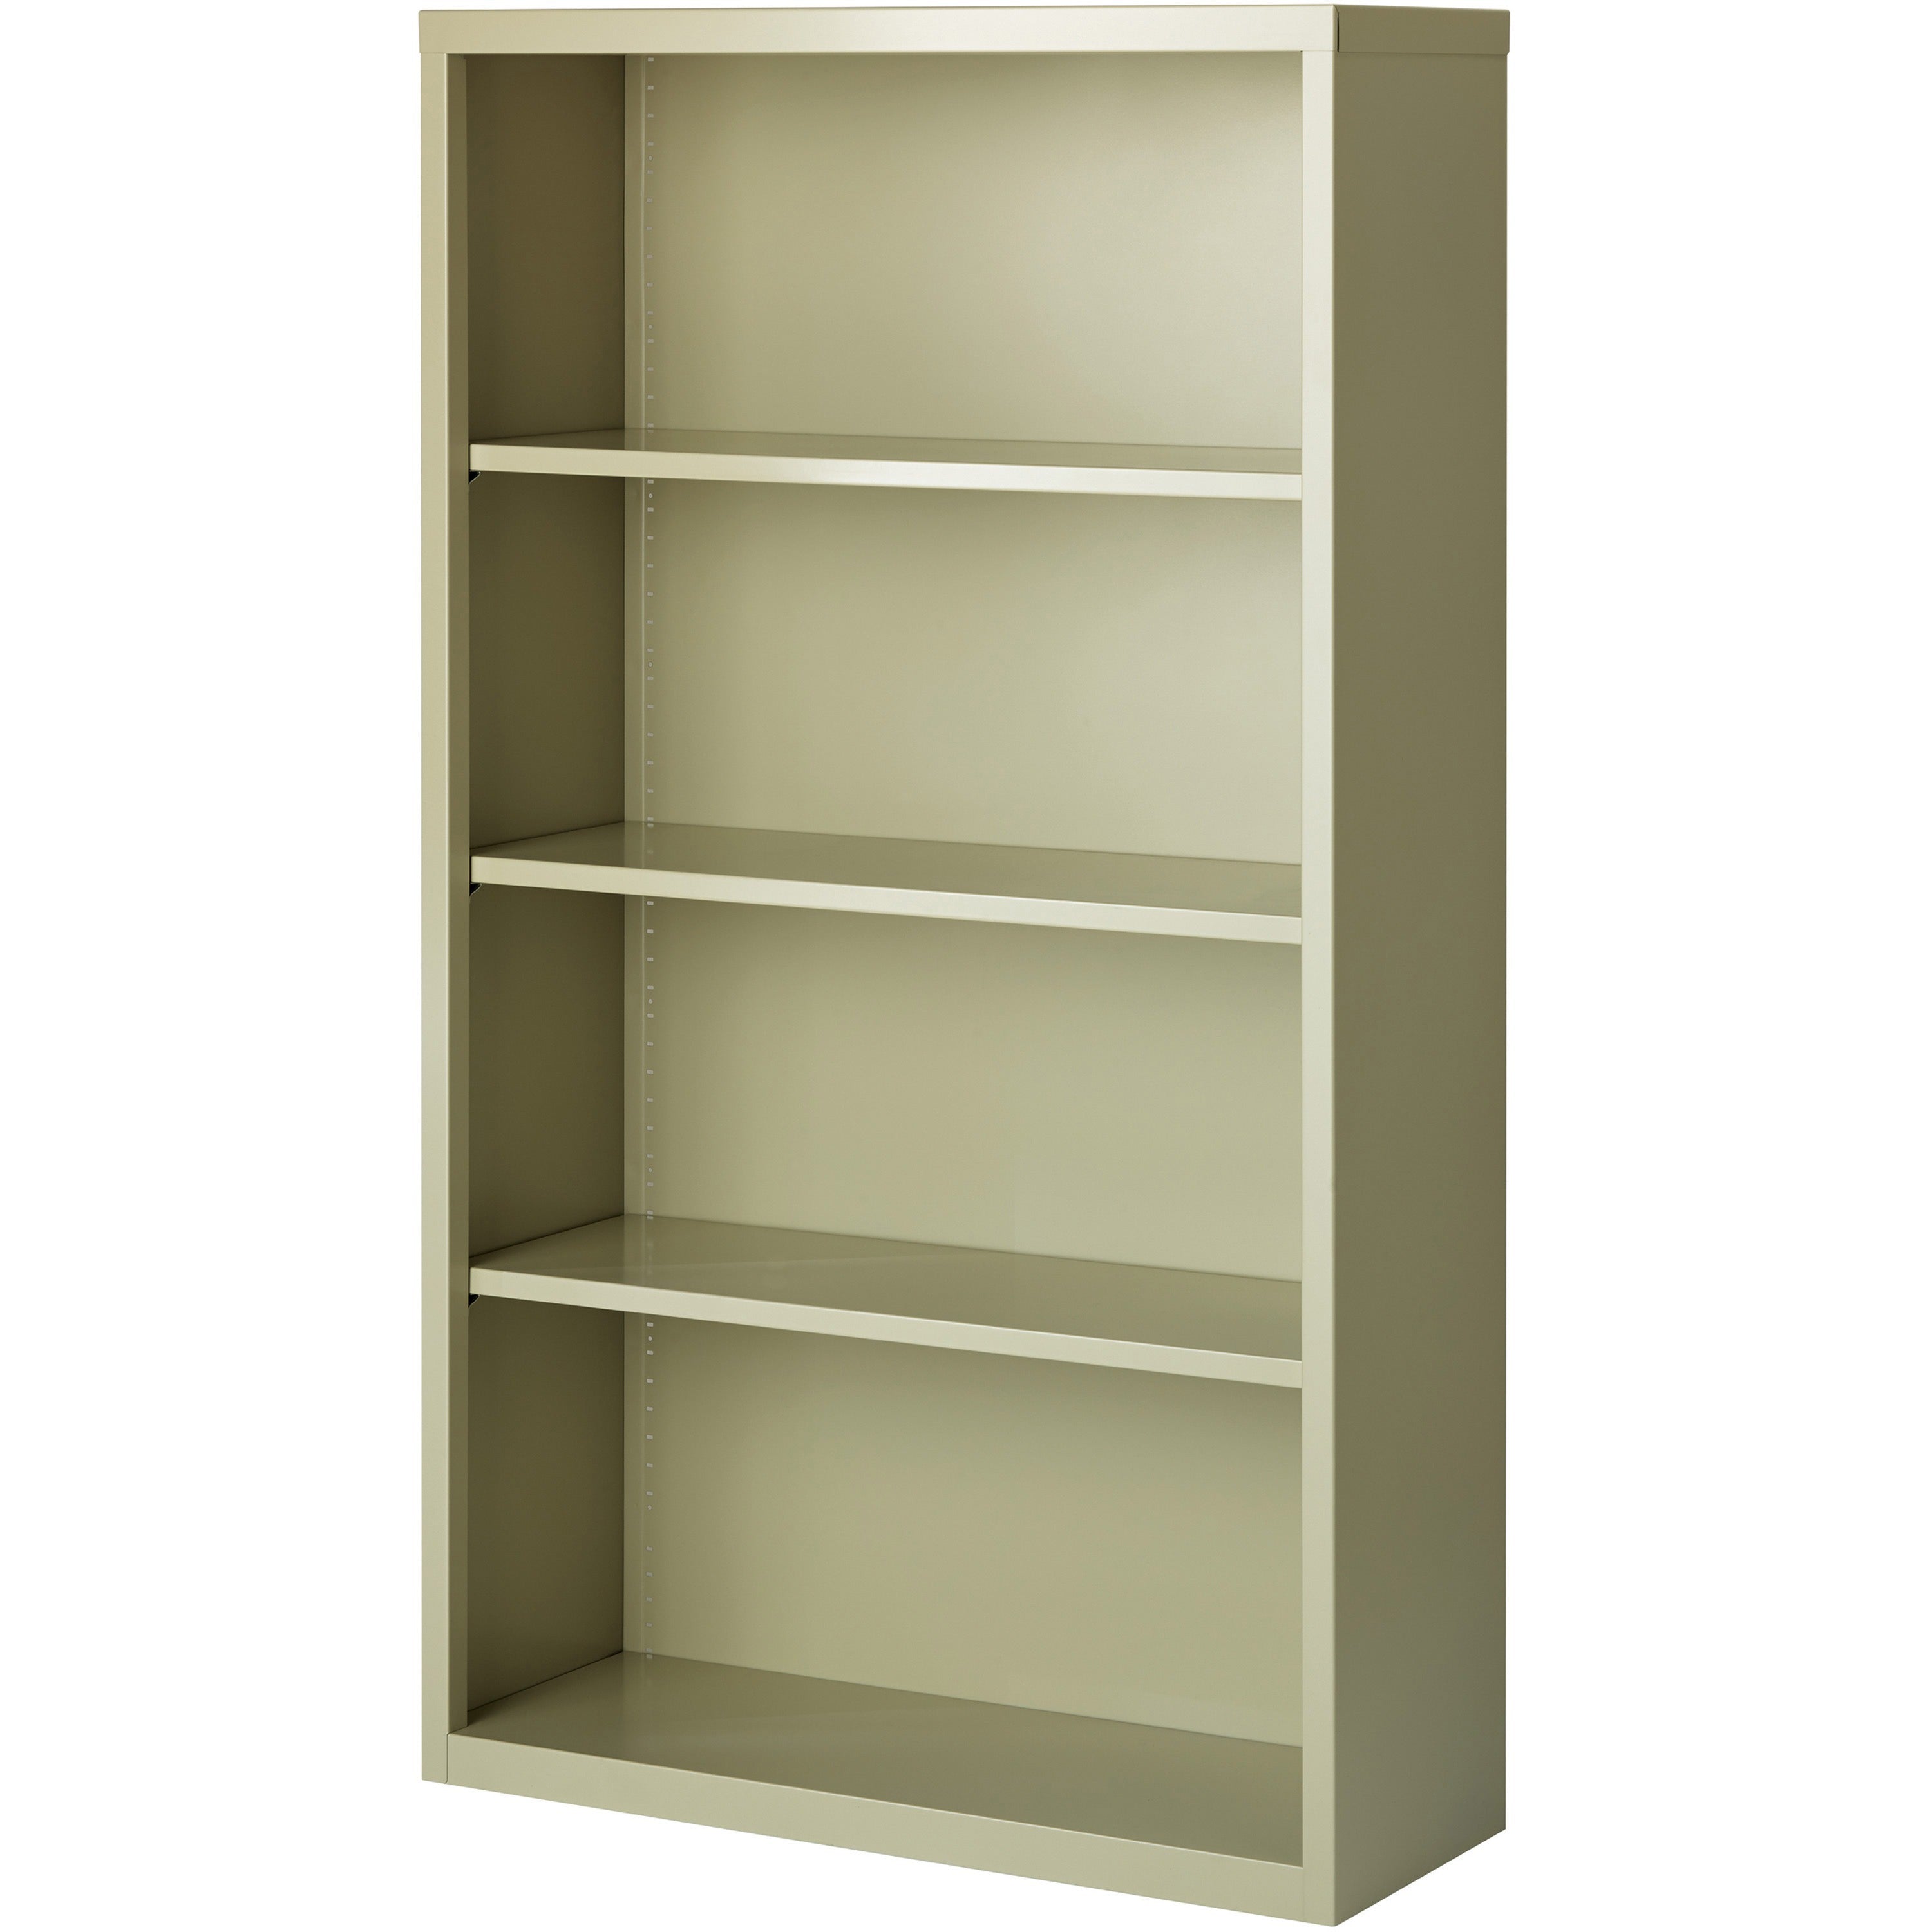 Lorell Fortress Series Bookcase - 34.5" x 13" x 60" - 4 x Shelf(ves) - Putty - Powder Coated - Steel - Recycled - 